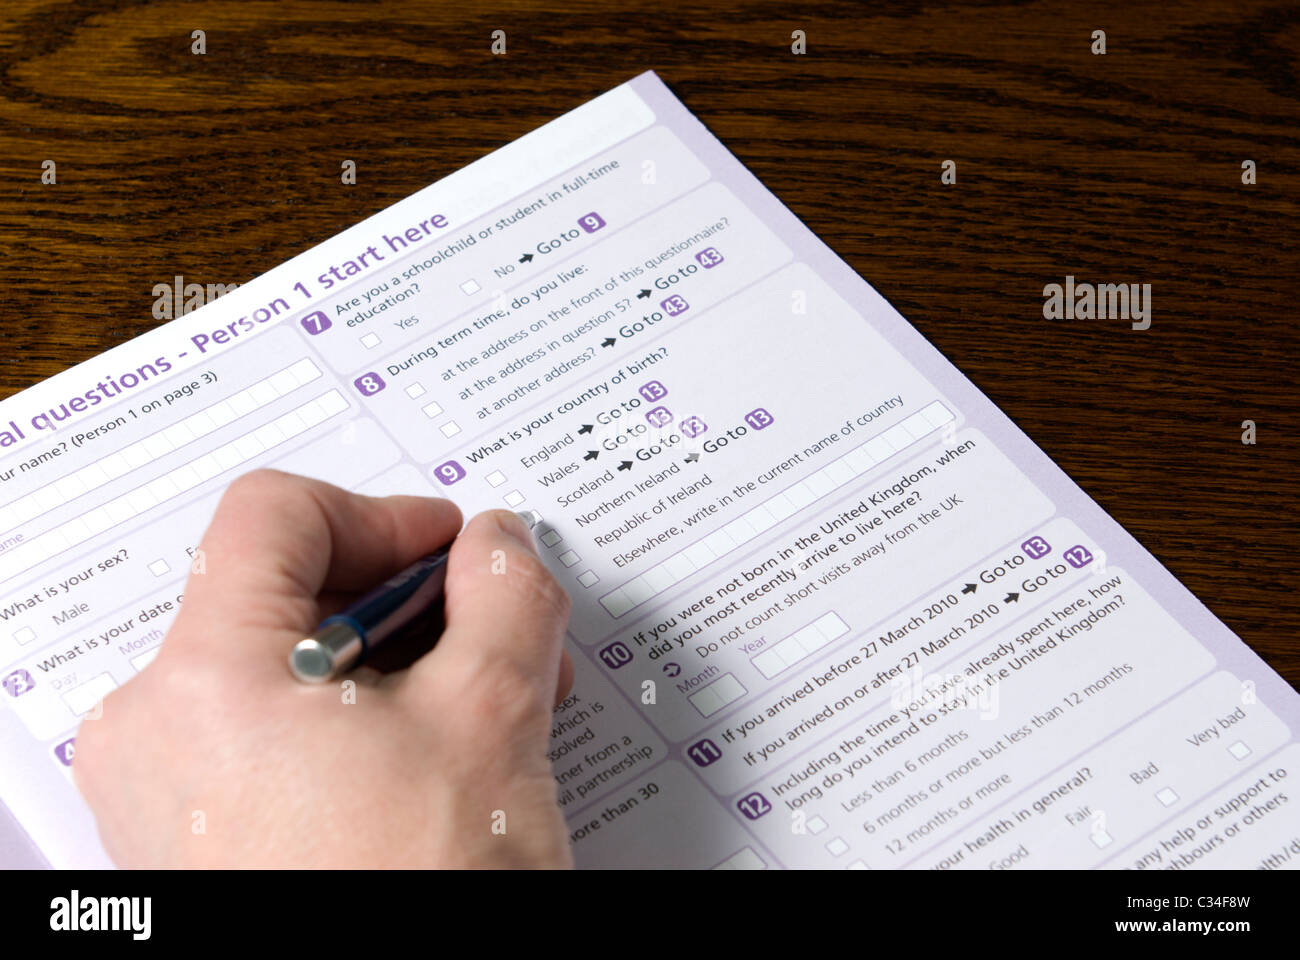 Completing the 2011 Census questionnaire Stock Photo